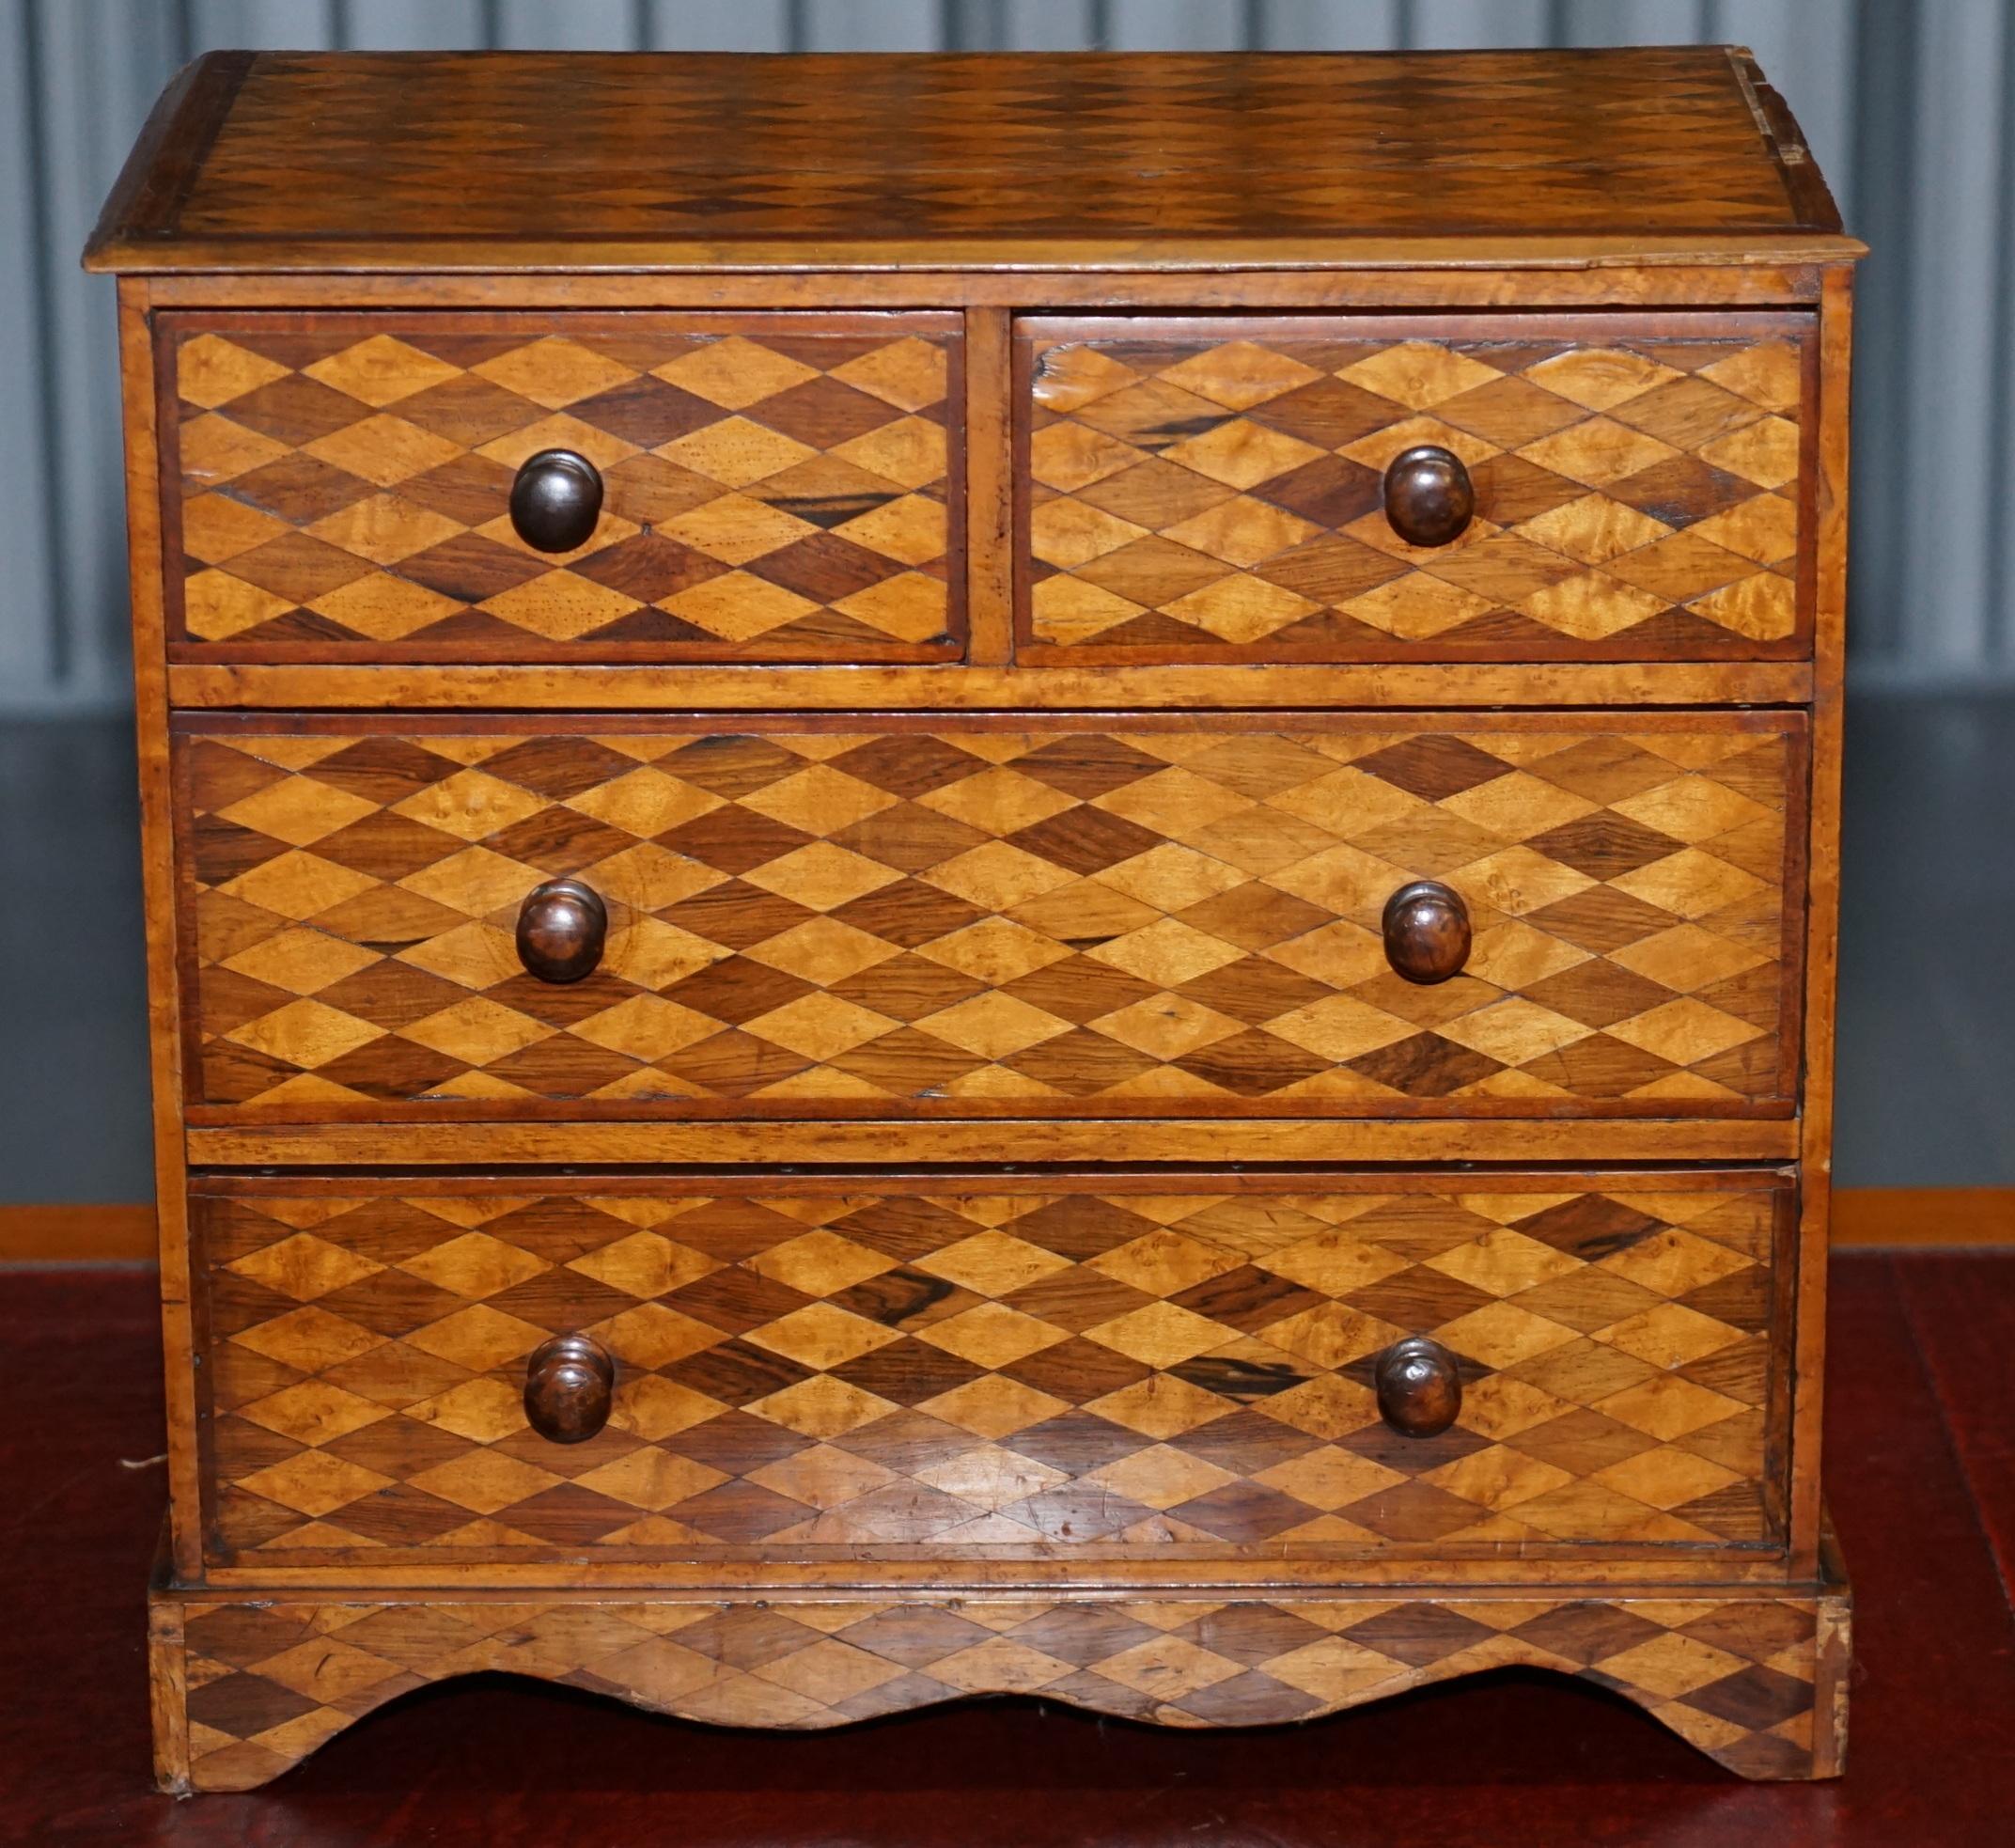 We are delighted to offer for sale this stunning and very rare circa 1750 salesman sample chest of drawers with satinwood and mahogany parquetry inlaid specimen wood 

A very rare and collectable decorative little chest of drawers, over 270 years